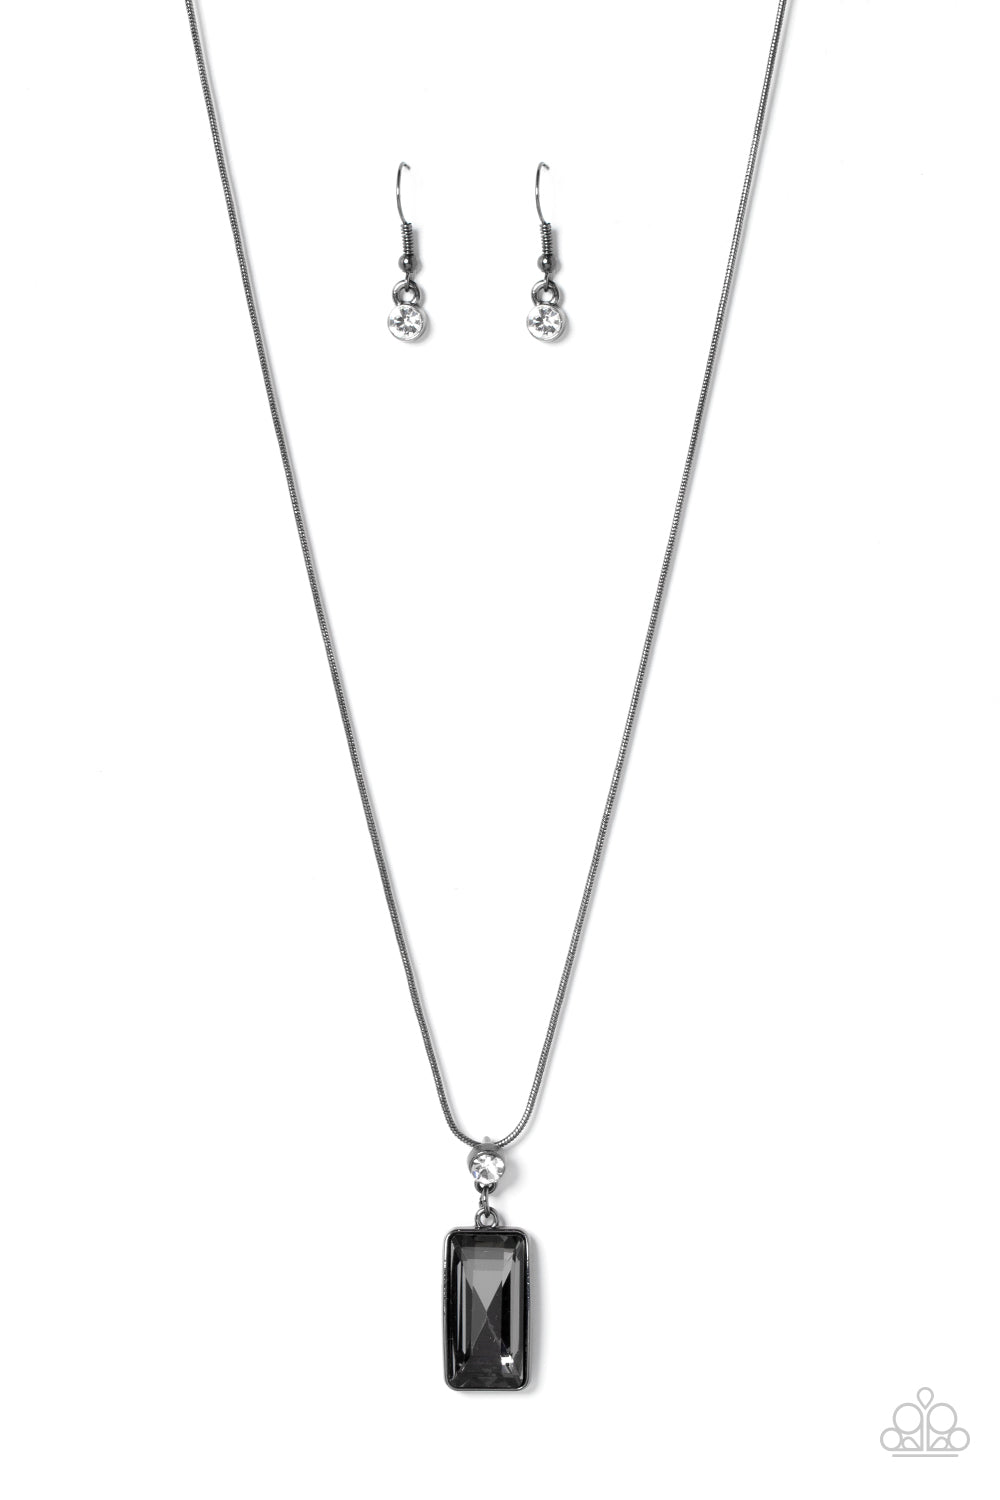 Cosmic Curator - Smoky Gem Gunmetal Necklace - Paparazzi Accessories - Encased in a sleek gunmetal frame, an emerald cut smoky gem swings from the bottom of a solitaire white rhinestone along a rounded gunmetal snake chain for an out-of-this-world fashion necklace. Bejeweled Accessories By Kristie - Trendy fashion jewelry for everyone -